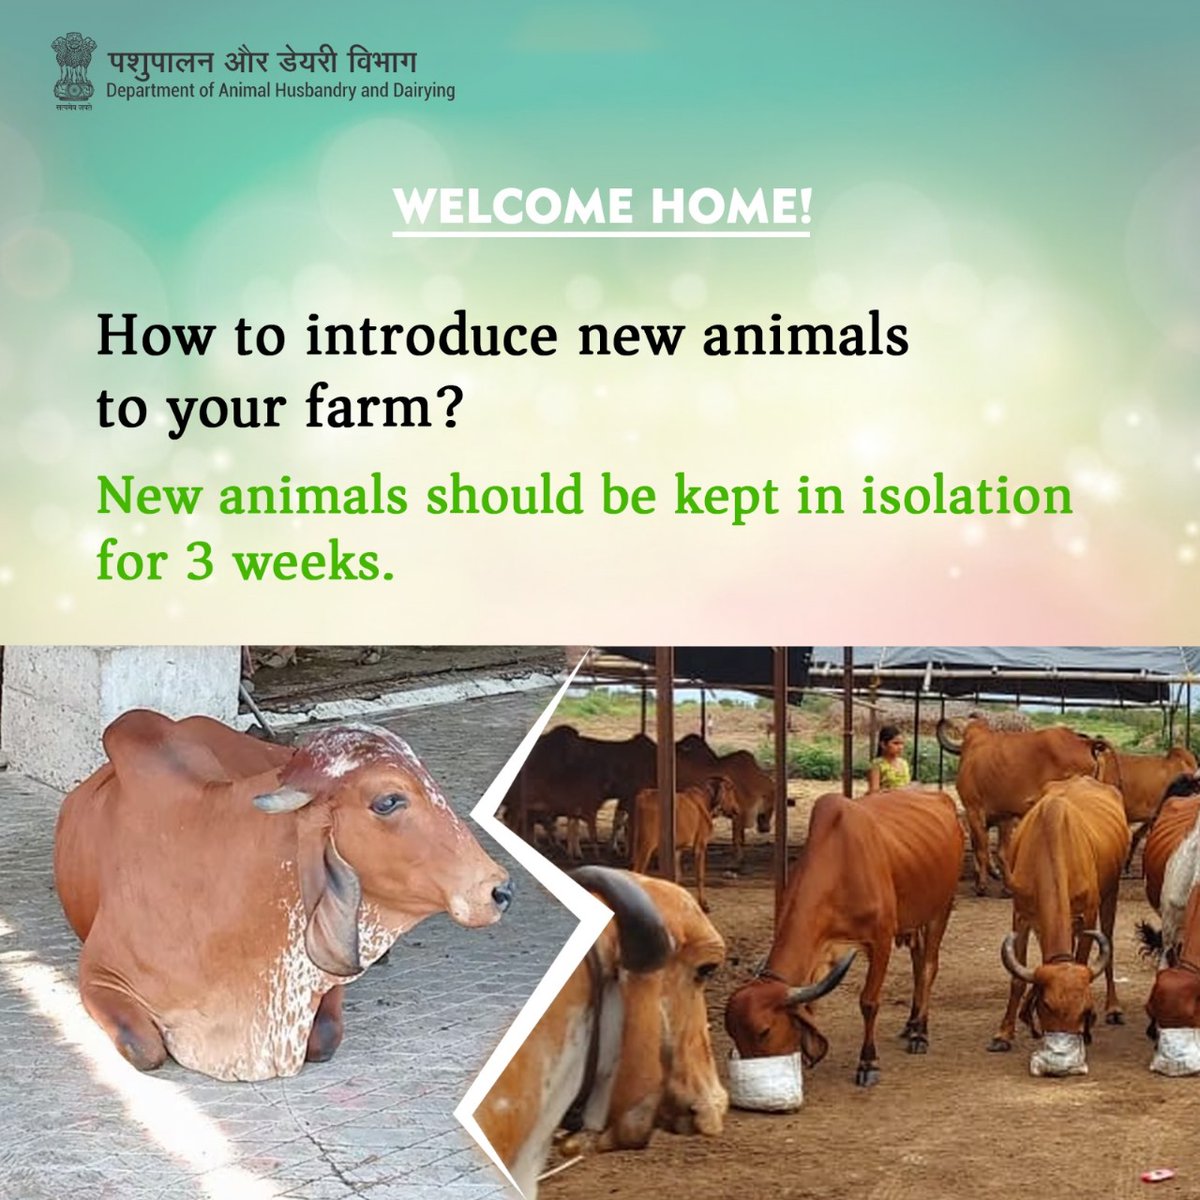 Welcome Home: New animals undergo a 3-week isolation period. It's not just about keeping them safe; it's about ensuring a healthy start for everyone. #IsolationPeriod #HealthyStart #FarmCare